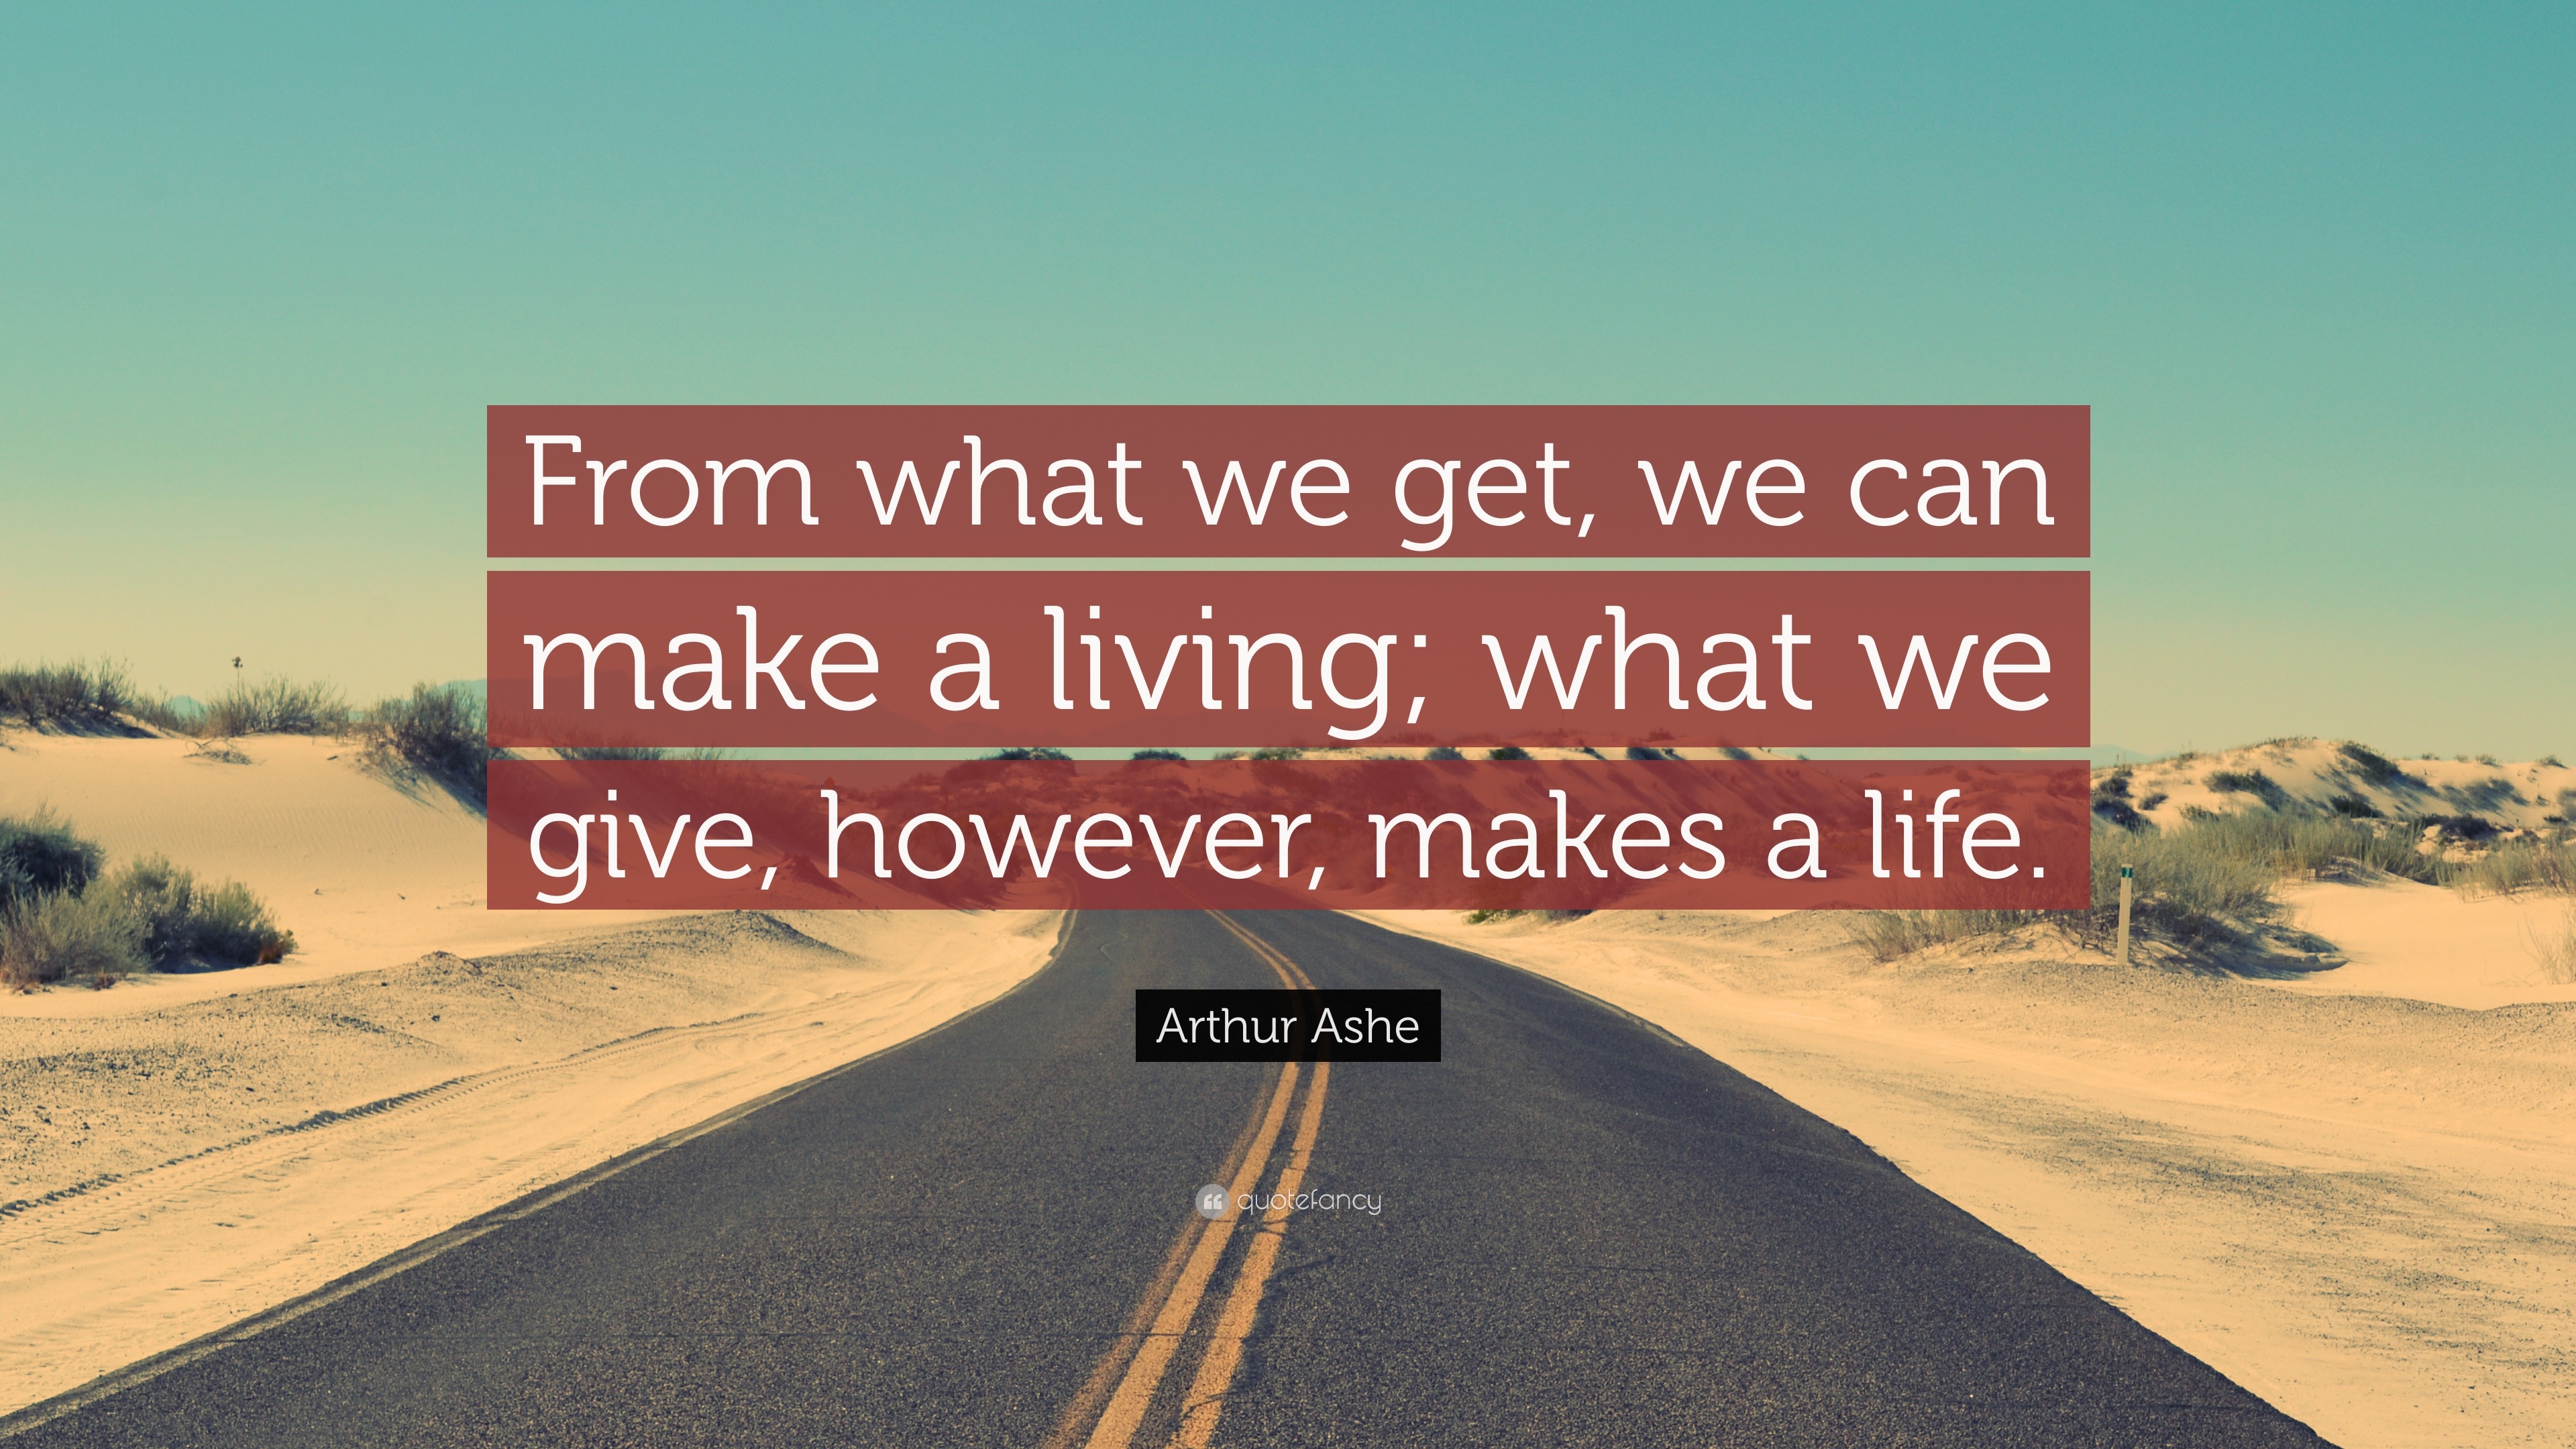 Arthur Ashe Quote: "From what we get, we can make a living ...